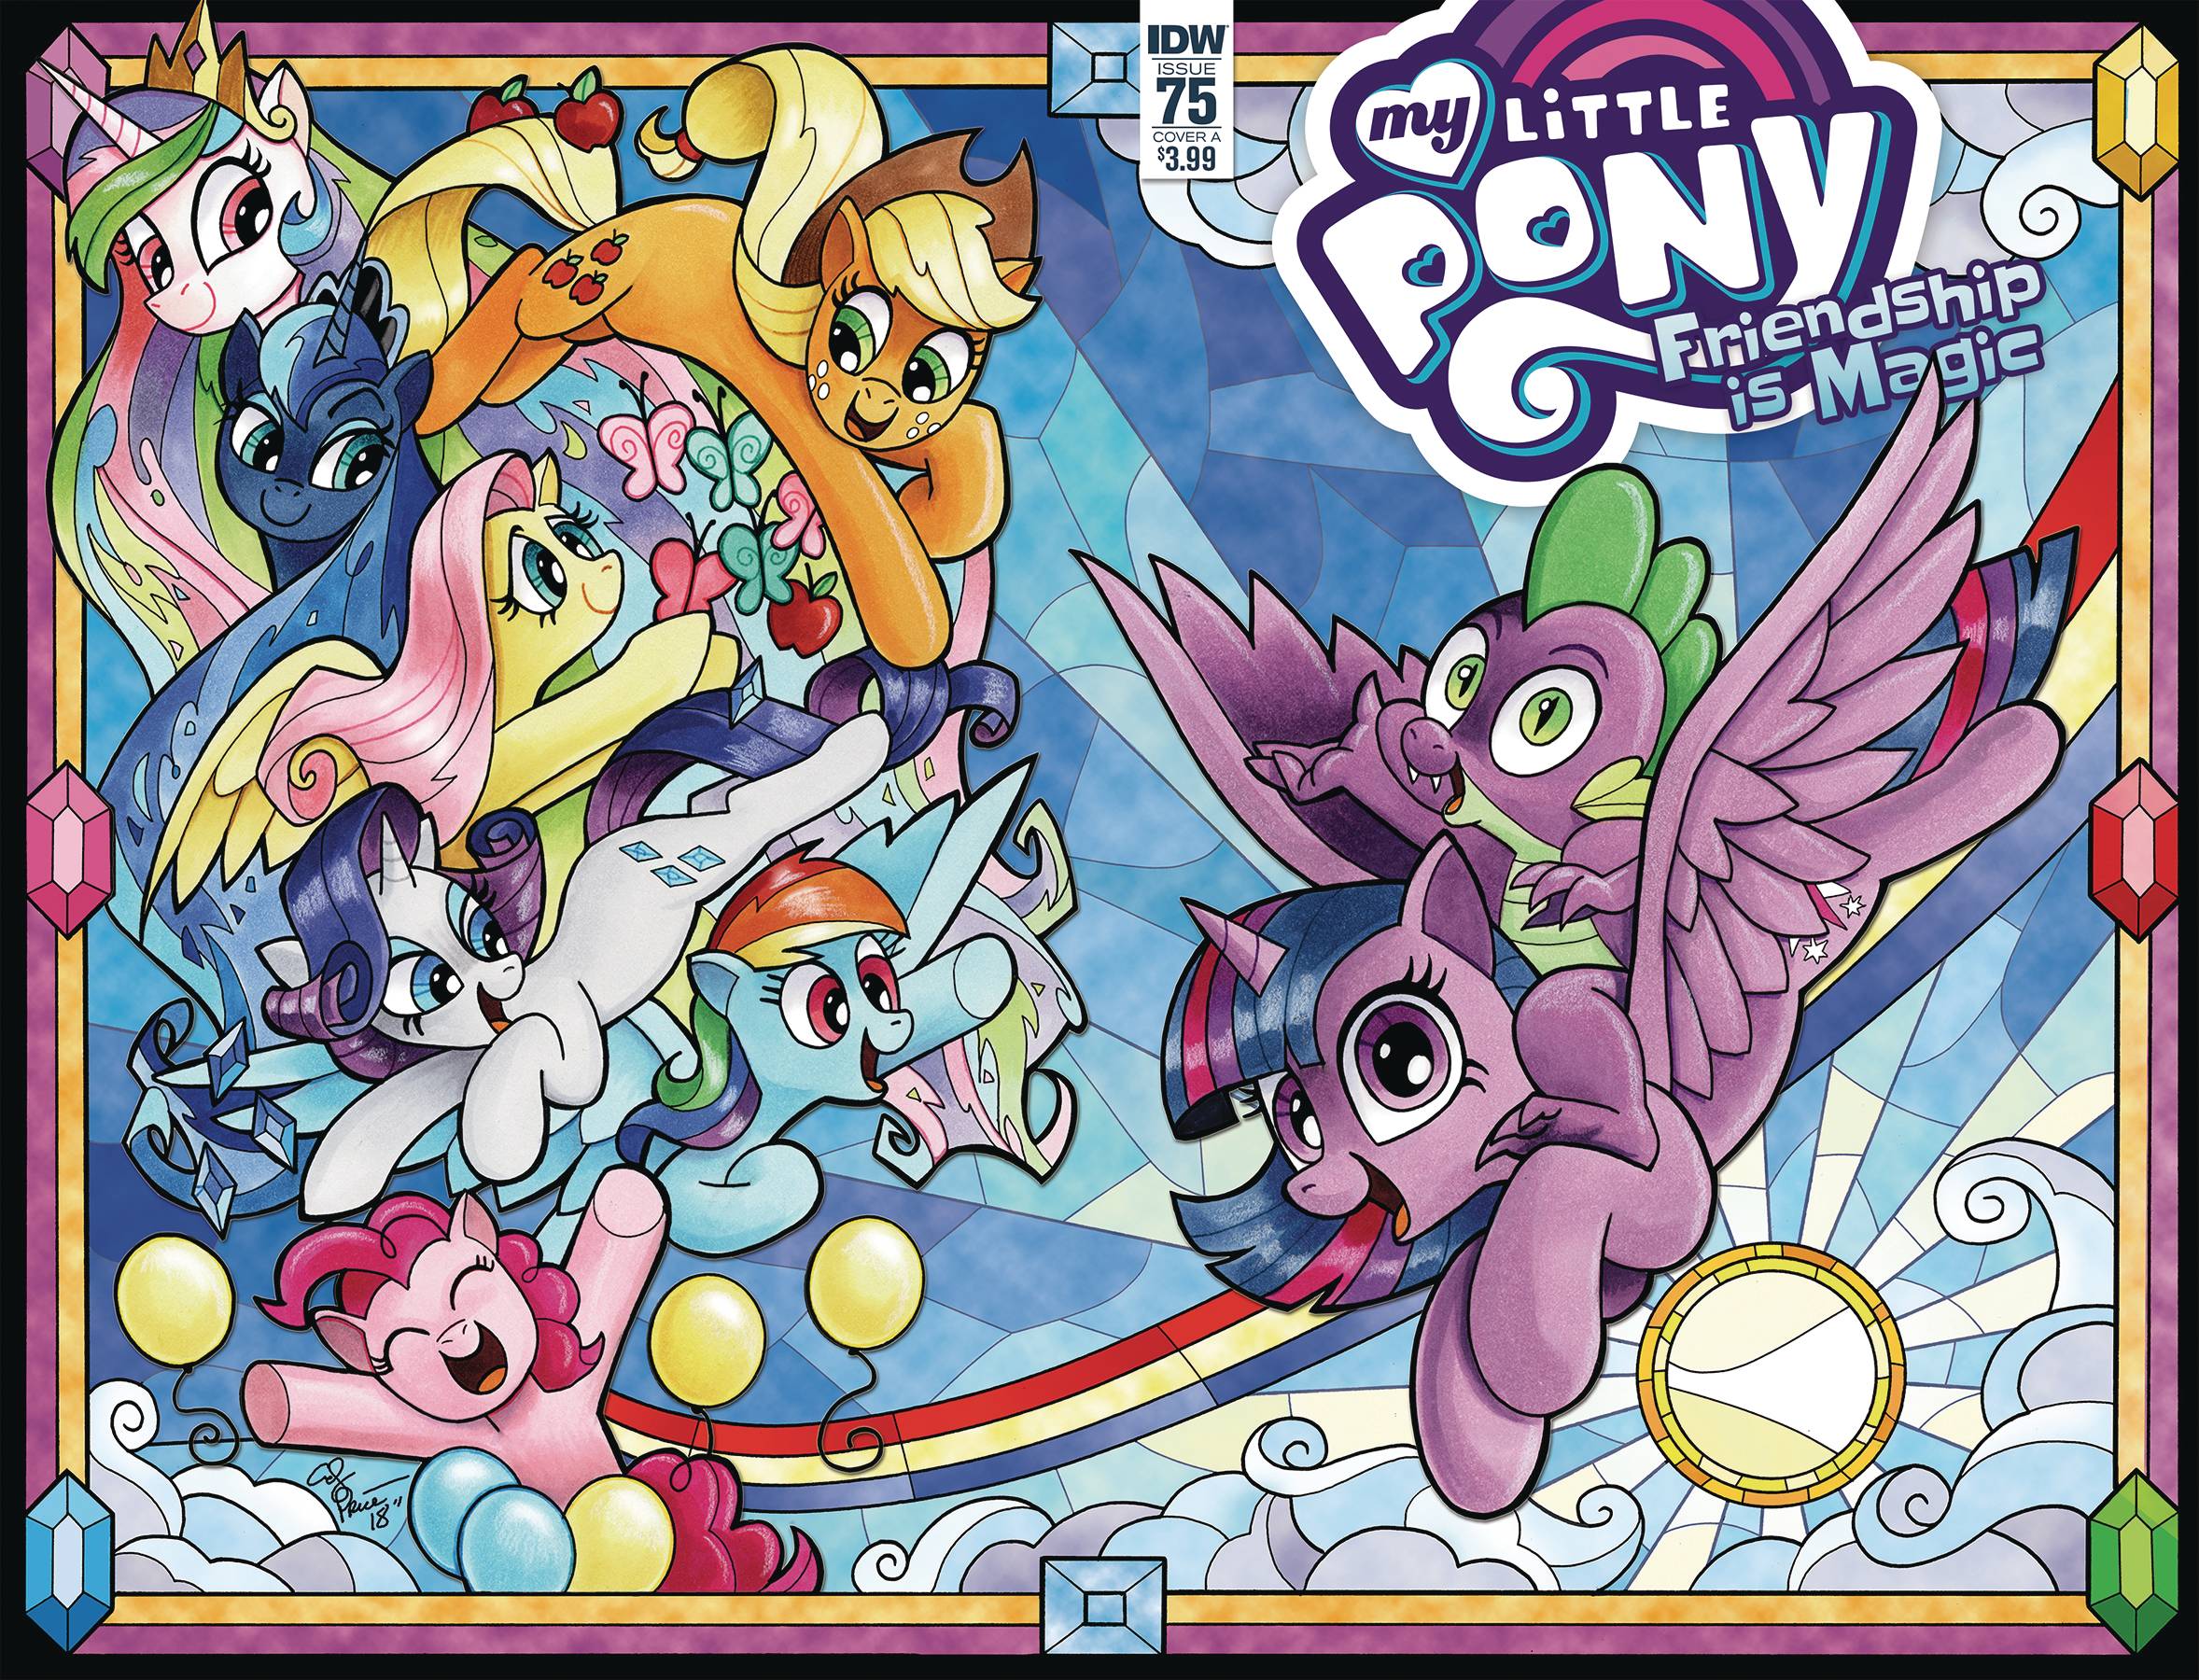 My Little Pony Friendship Is Magic #75 Cover A Price